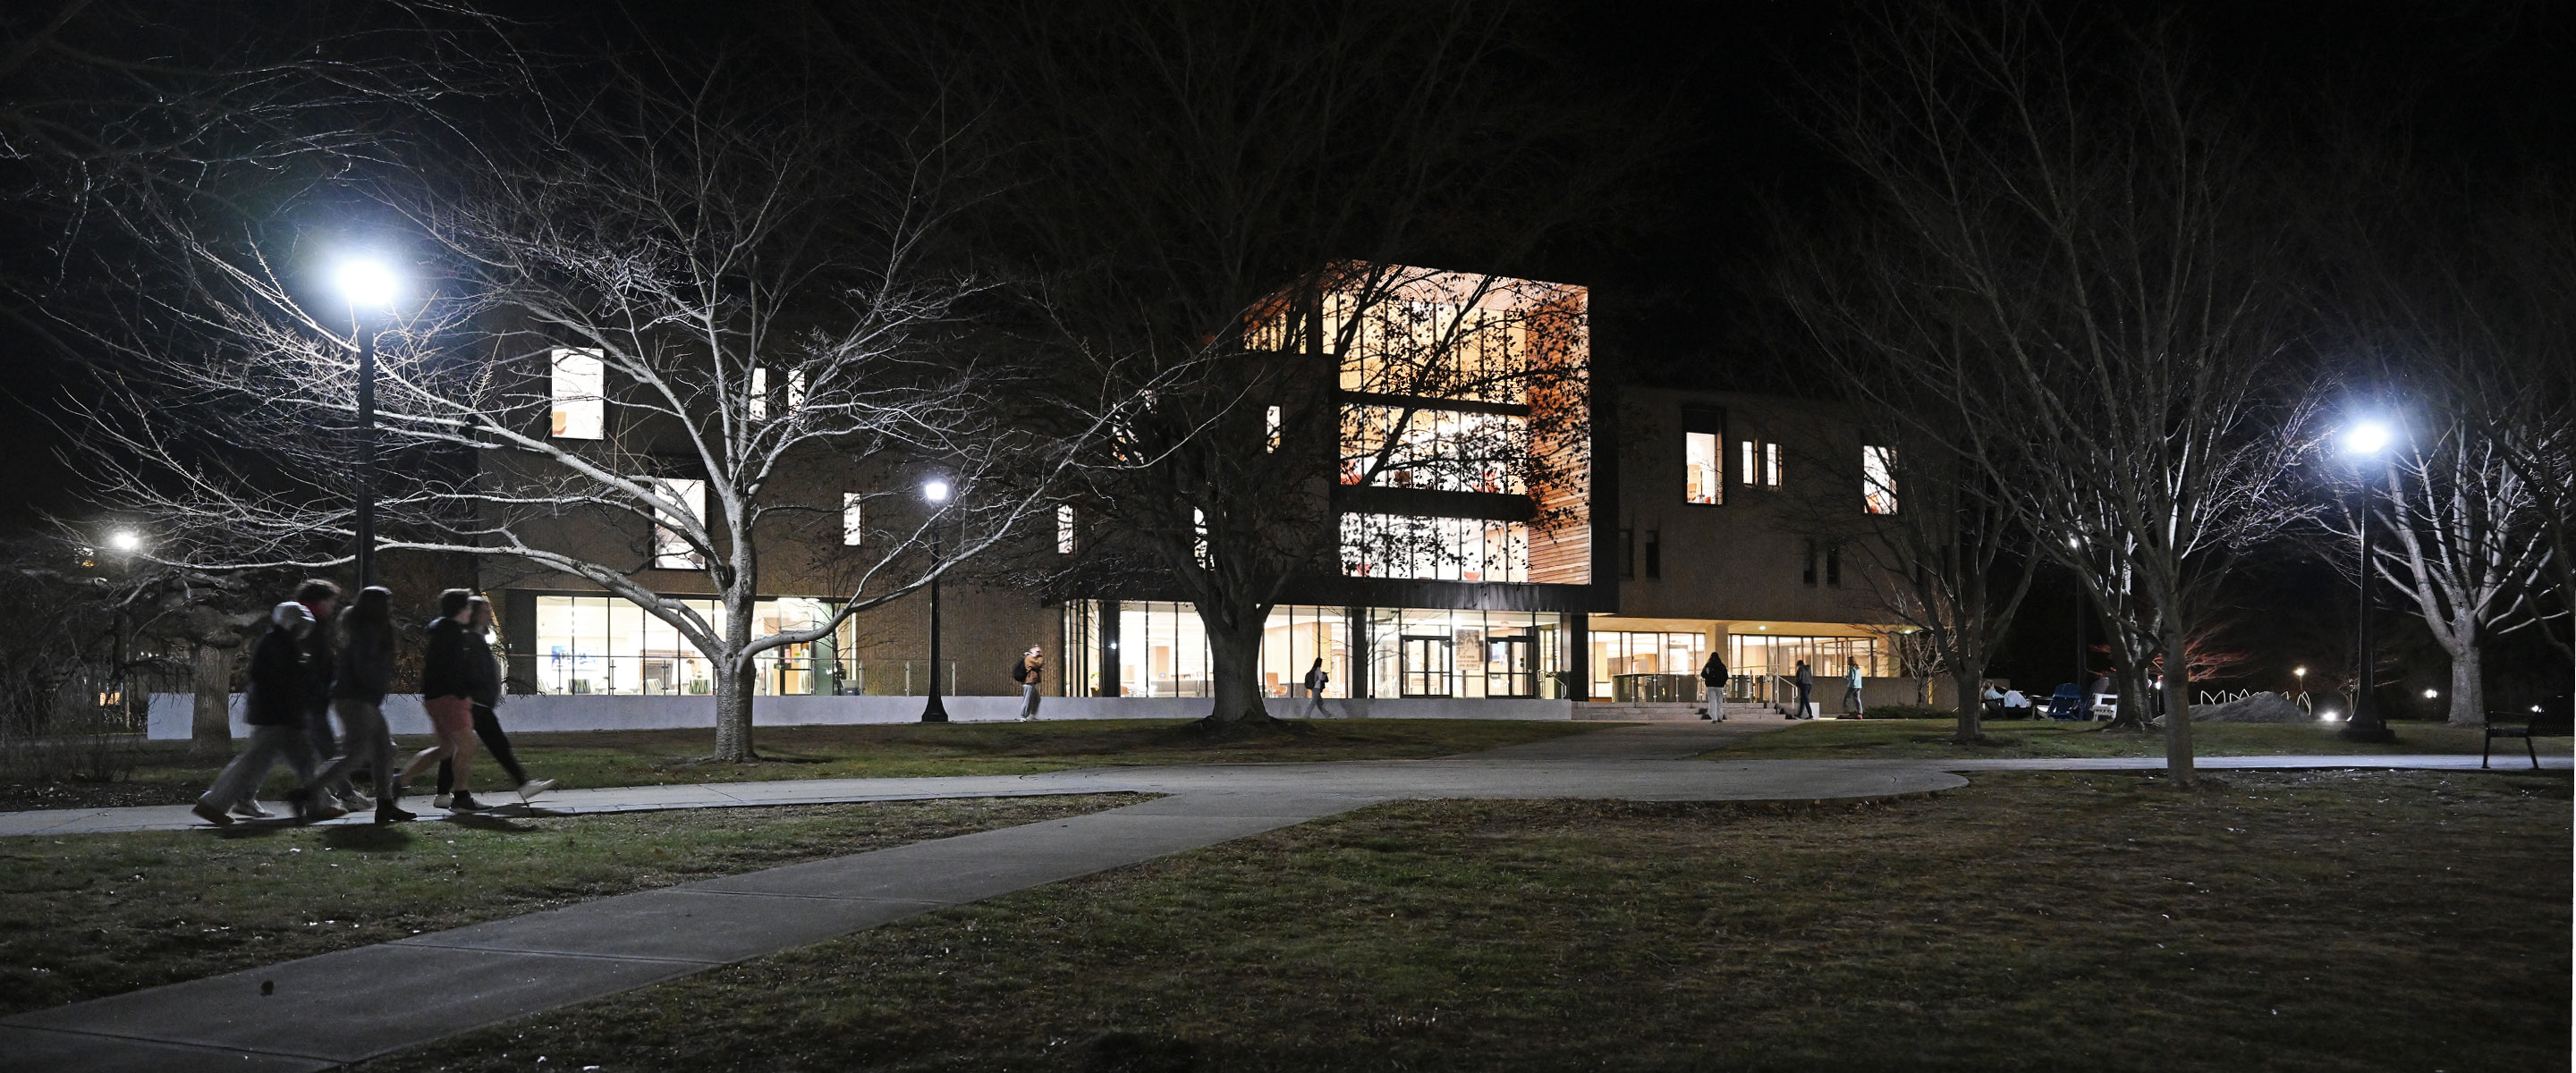 Students walk by Shain Library at night.